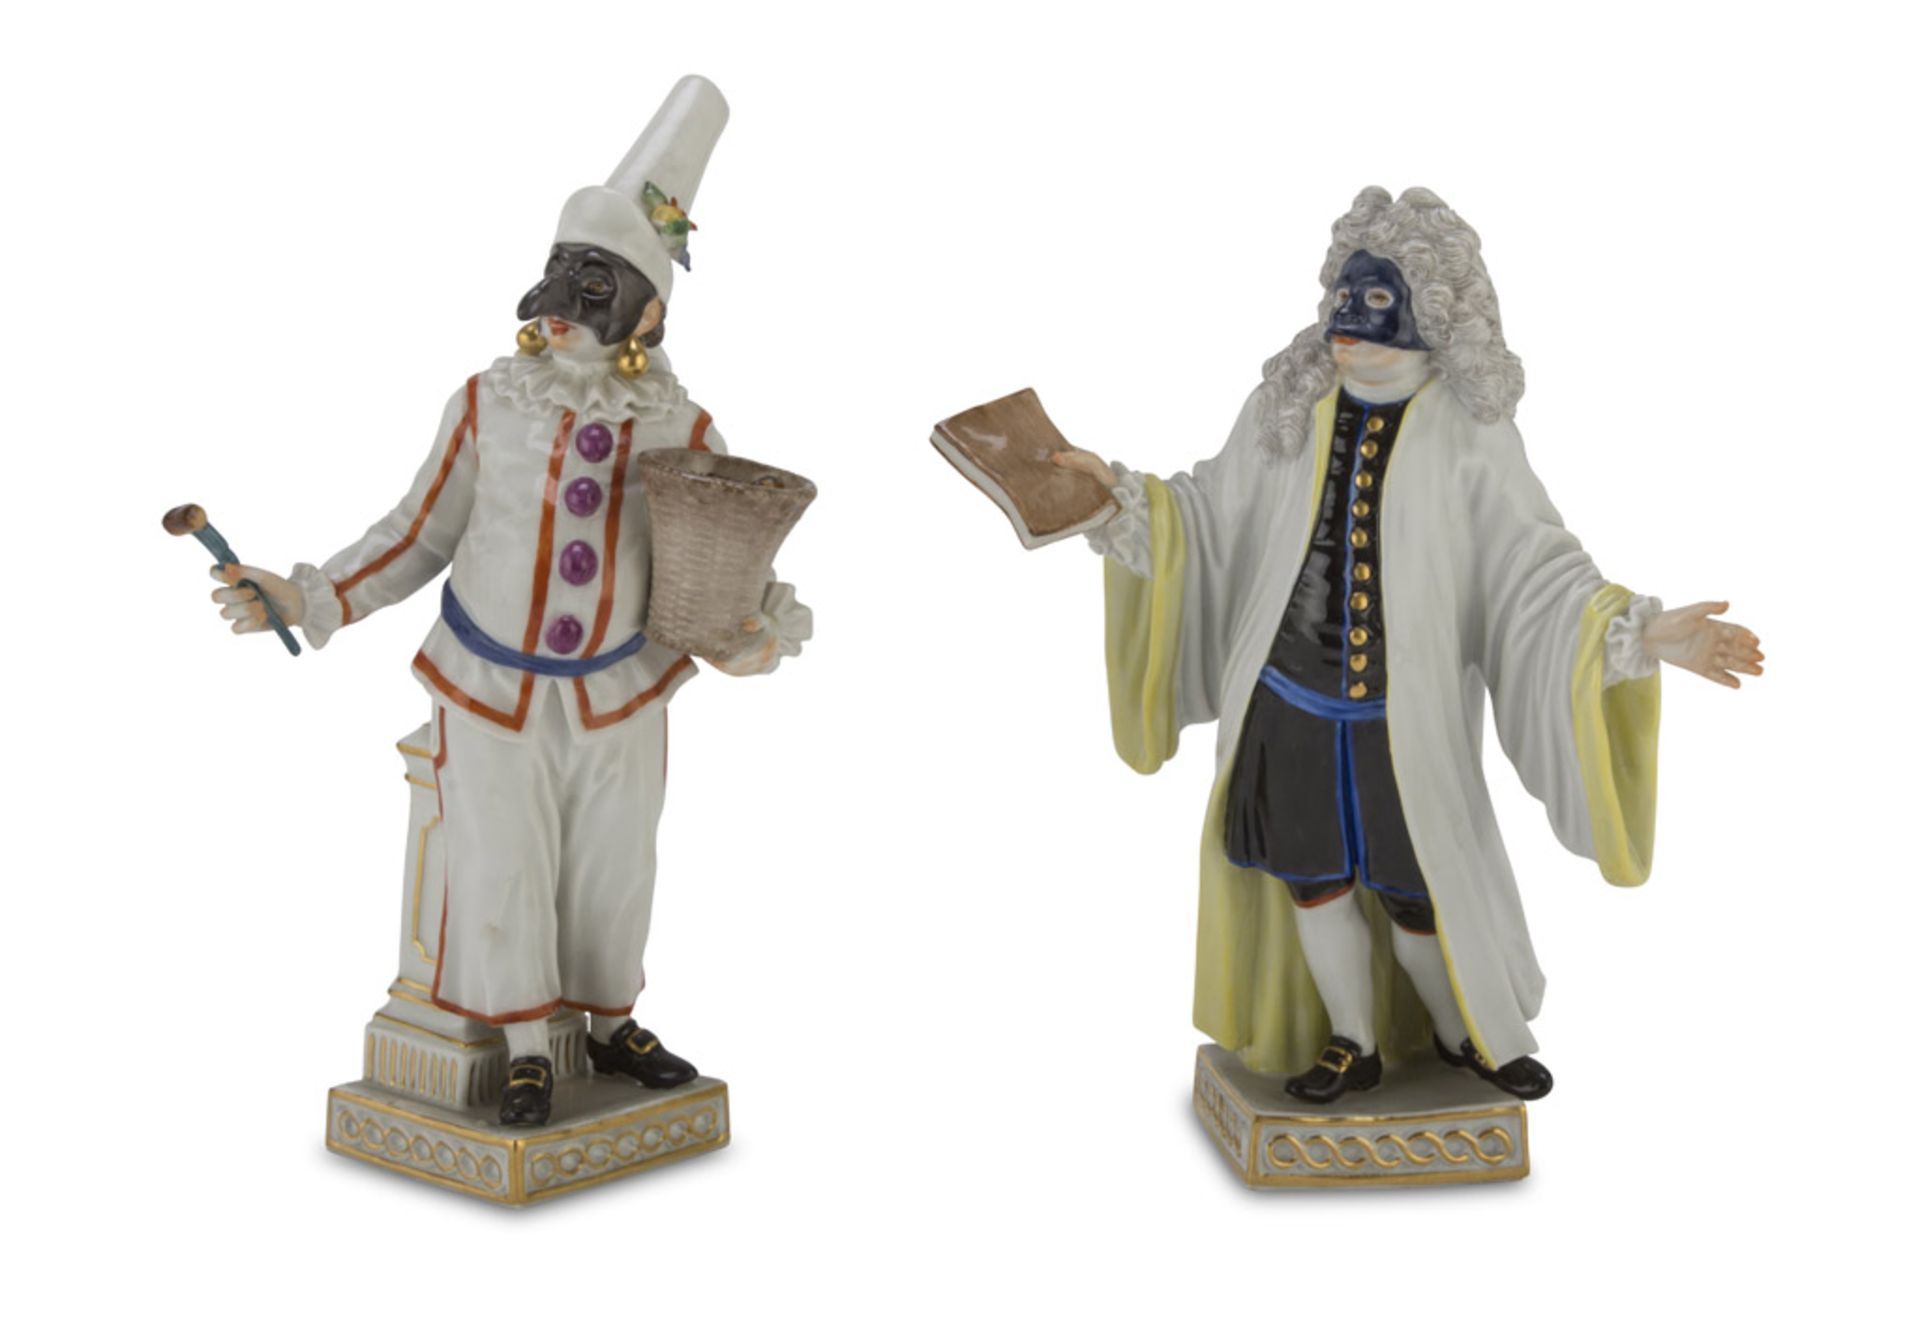 Two Porcelain sculptures, MESISSEN EARLY 20TH CENTURY in polychromy, representing Pulcinella and